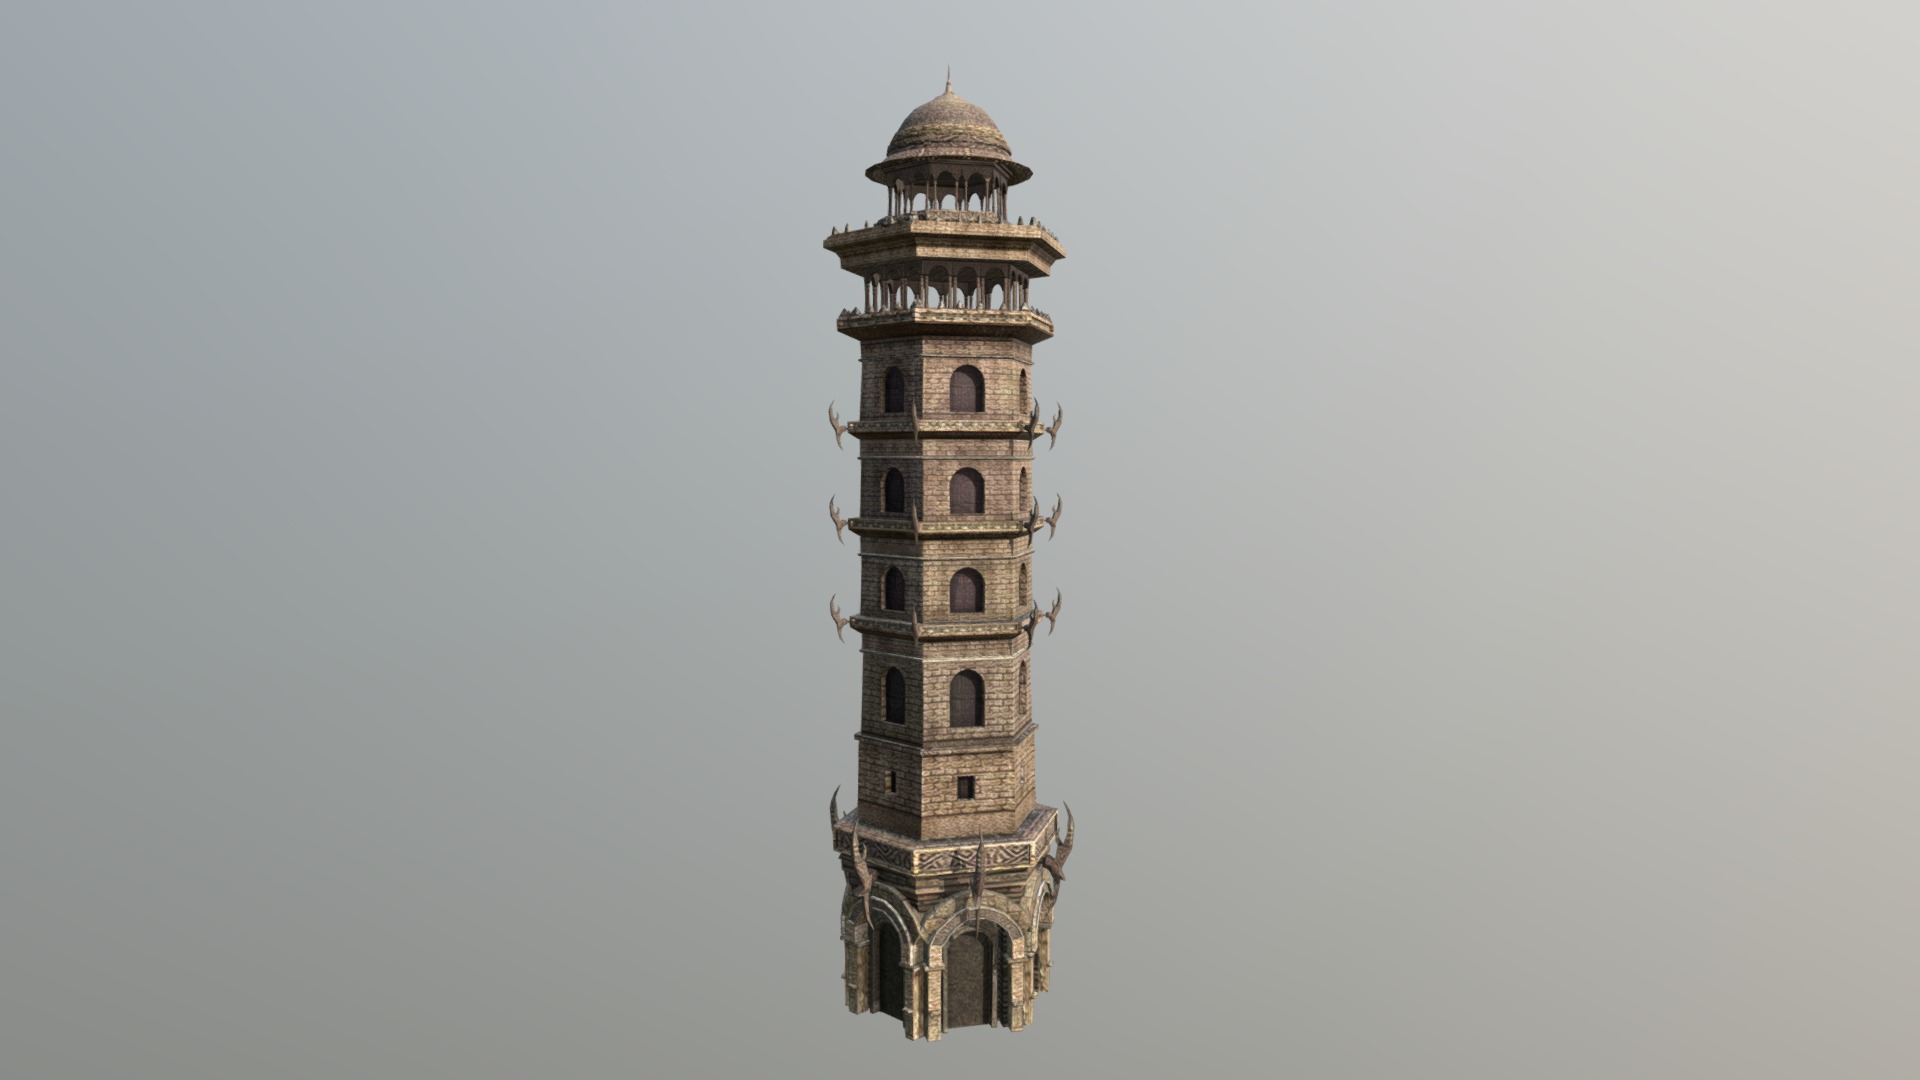 3D model Fantasy Central Asian Style High Tower - This is a 3D model of the Fantasy Central Asian Style High Tower. The 3D model is about a tall tower with a domed top.